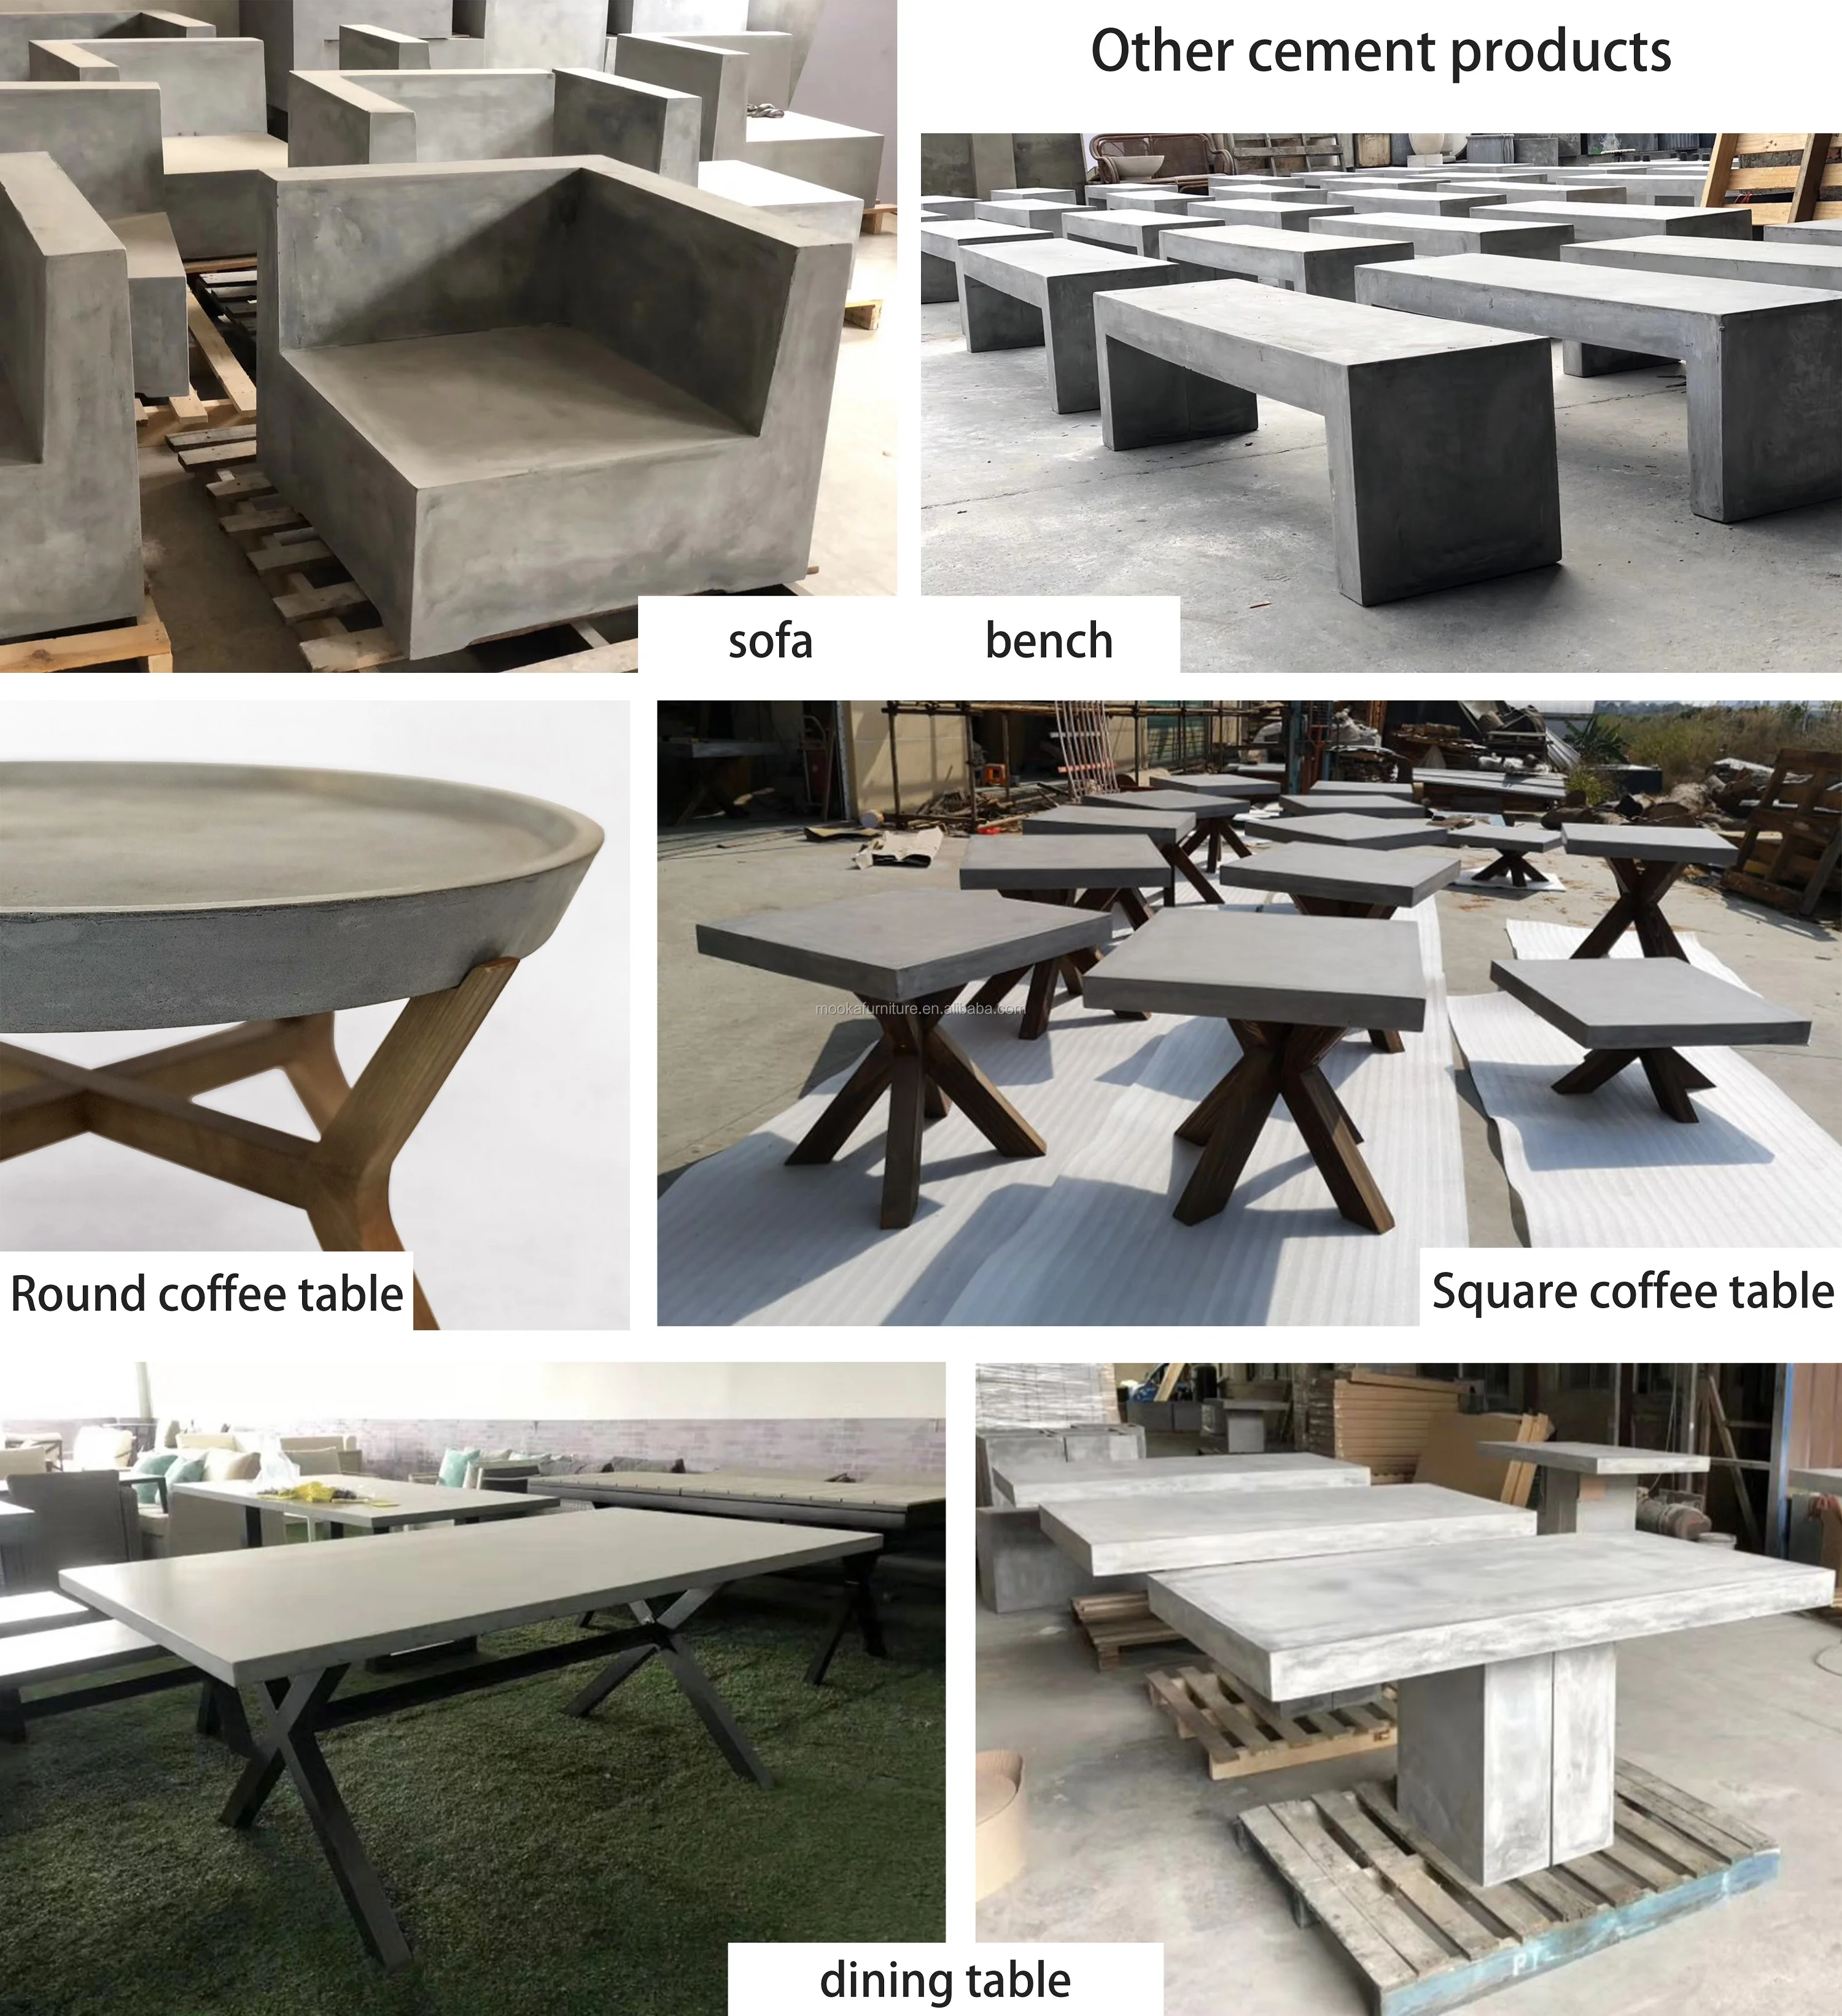 Garden Furniture Rustic Style Outdoor Cement Table Top With Solid Wood Leg Dining Table Antique Look Round Concrete Coffee Table Buy Concrete Coffee Table Outdoor Concrete Table Concrete Garden Table Concrete